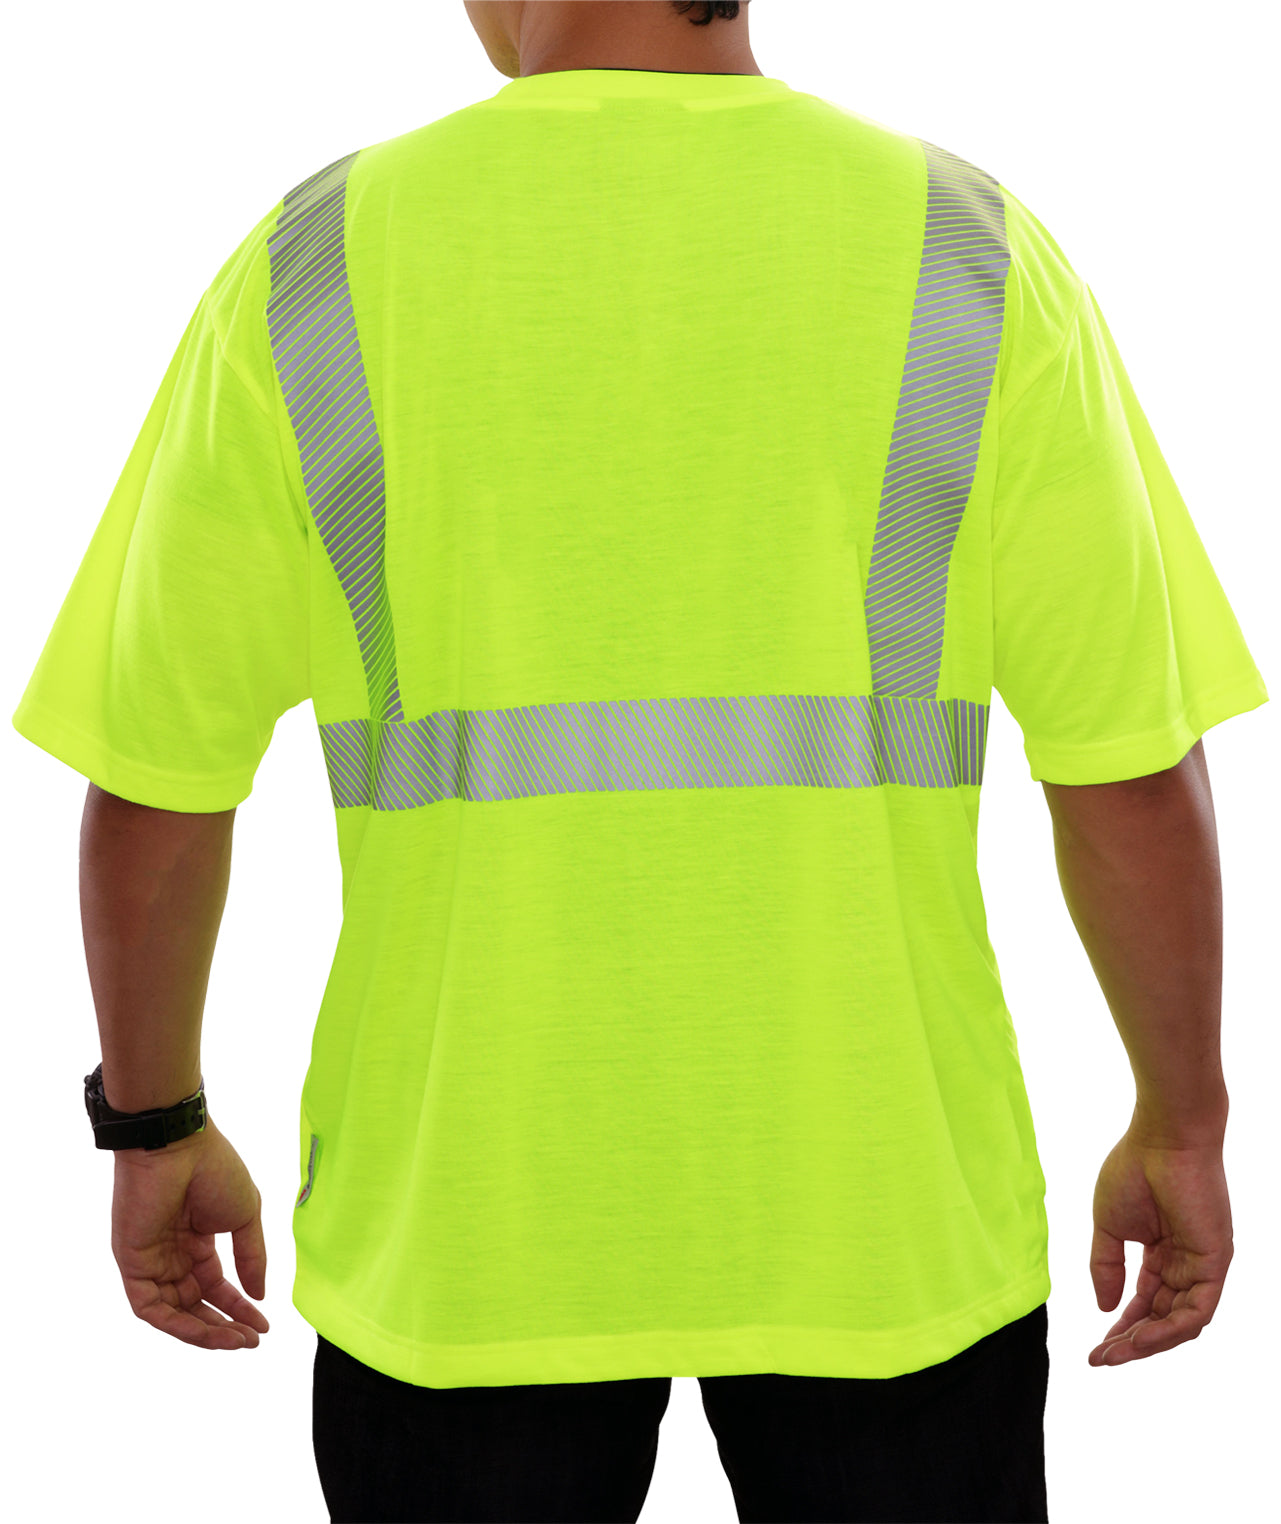 Reflective Strips Clothing Safety Clothing For Men 5XL Polyester